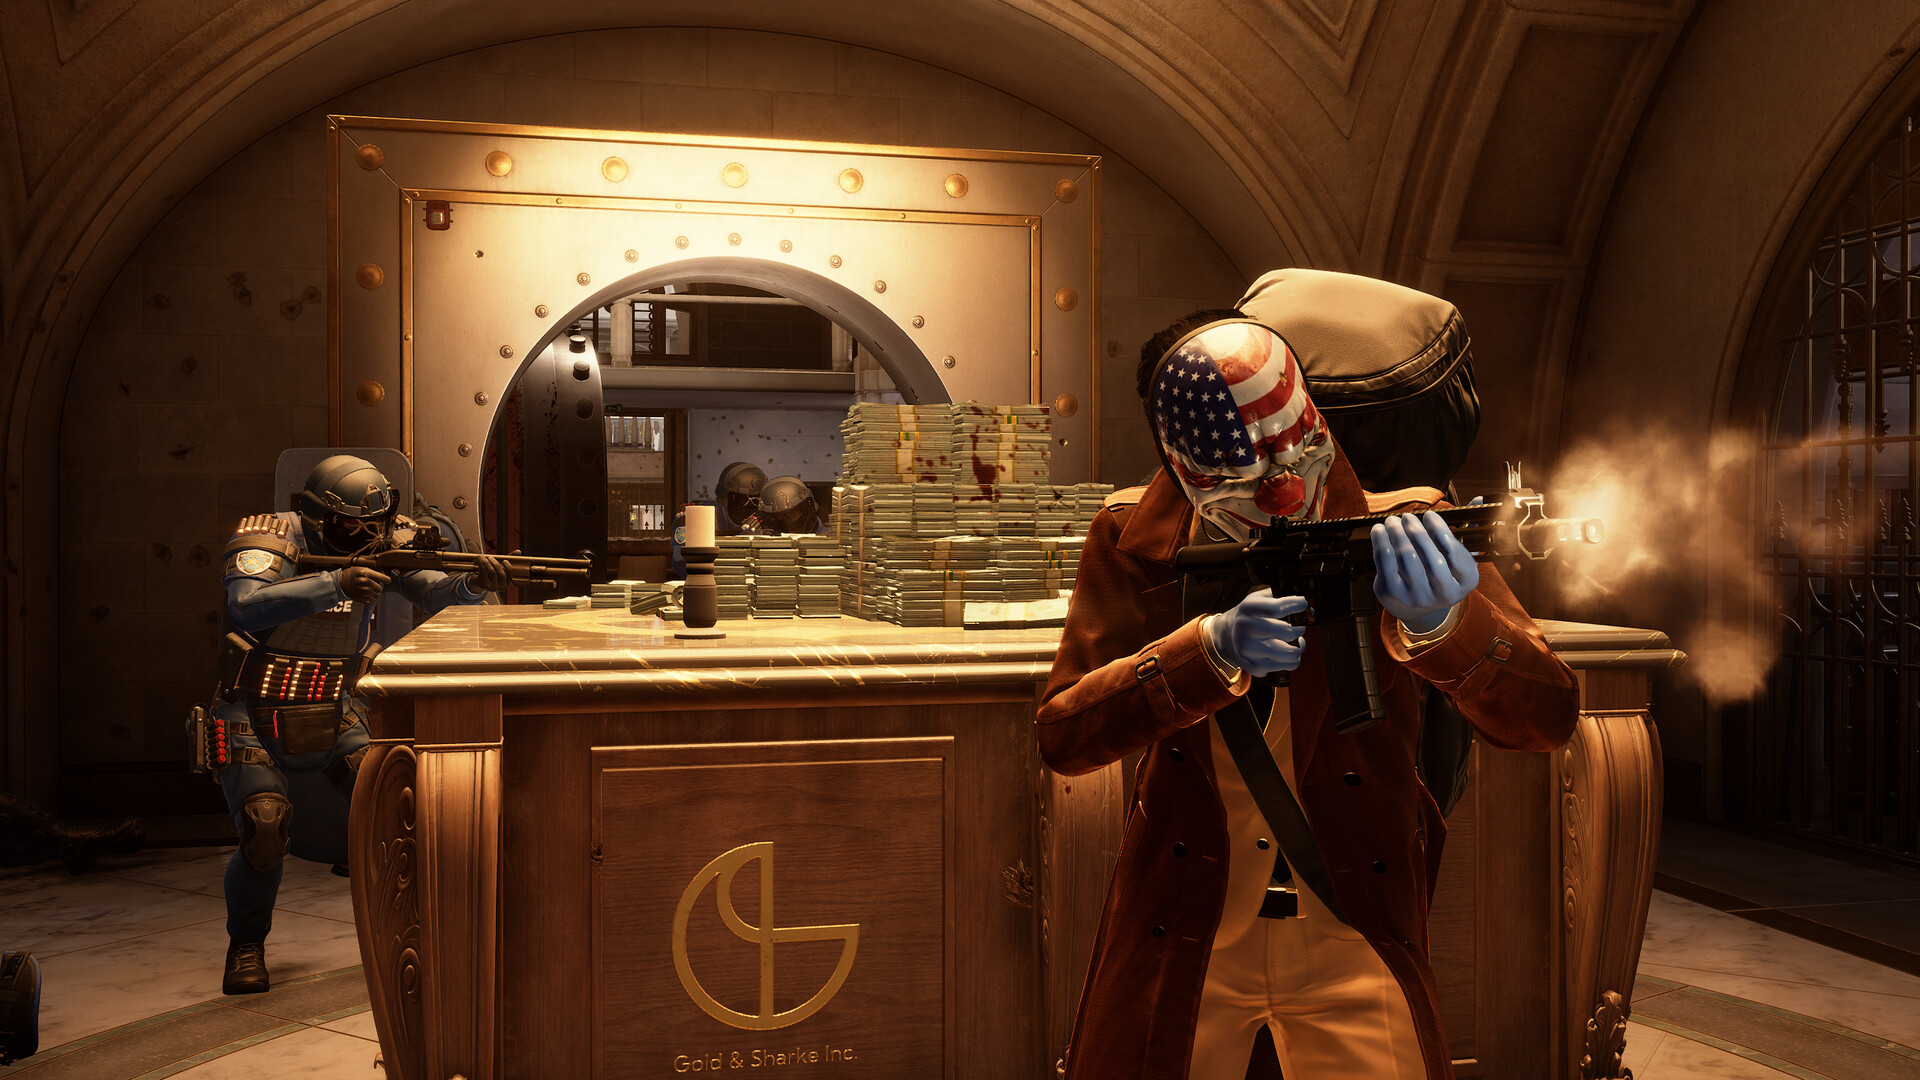 Payday 3 review: the plan is set. Now comes the hard part